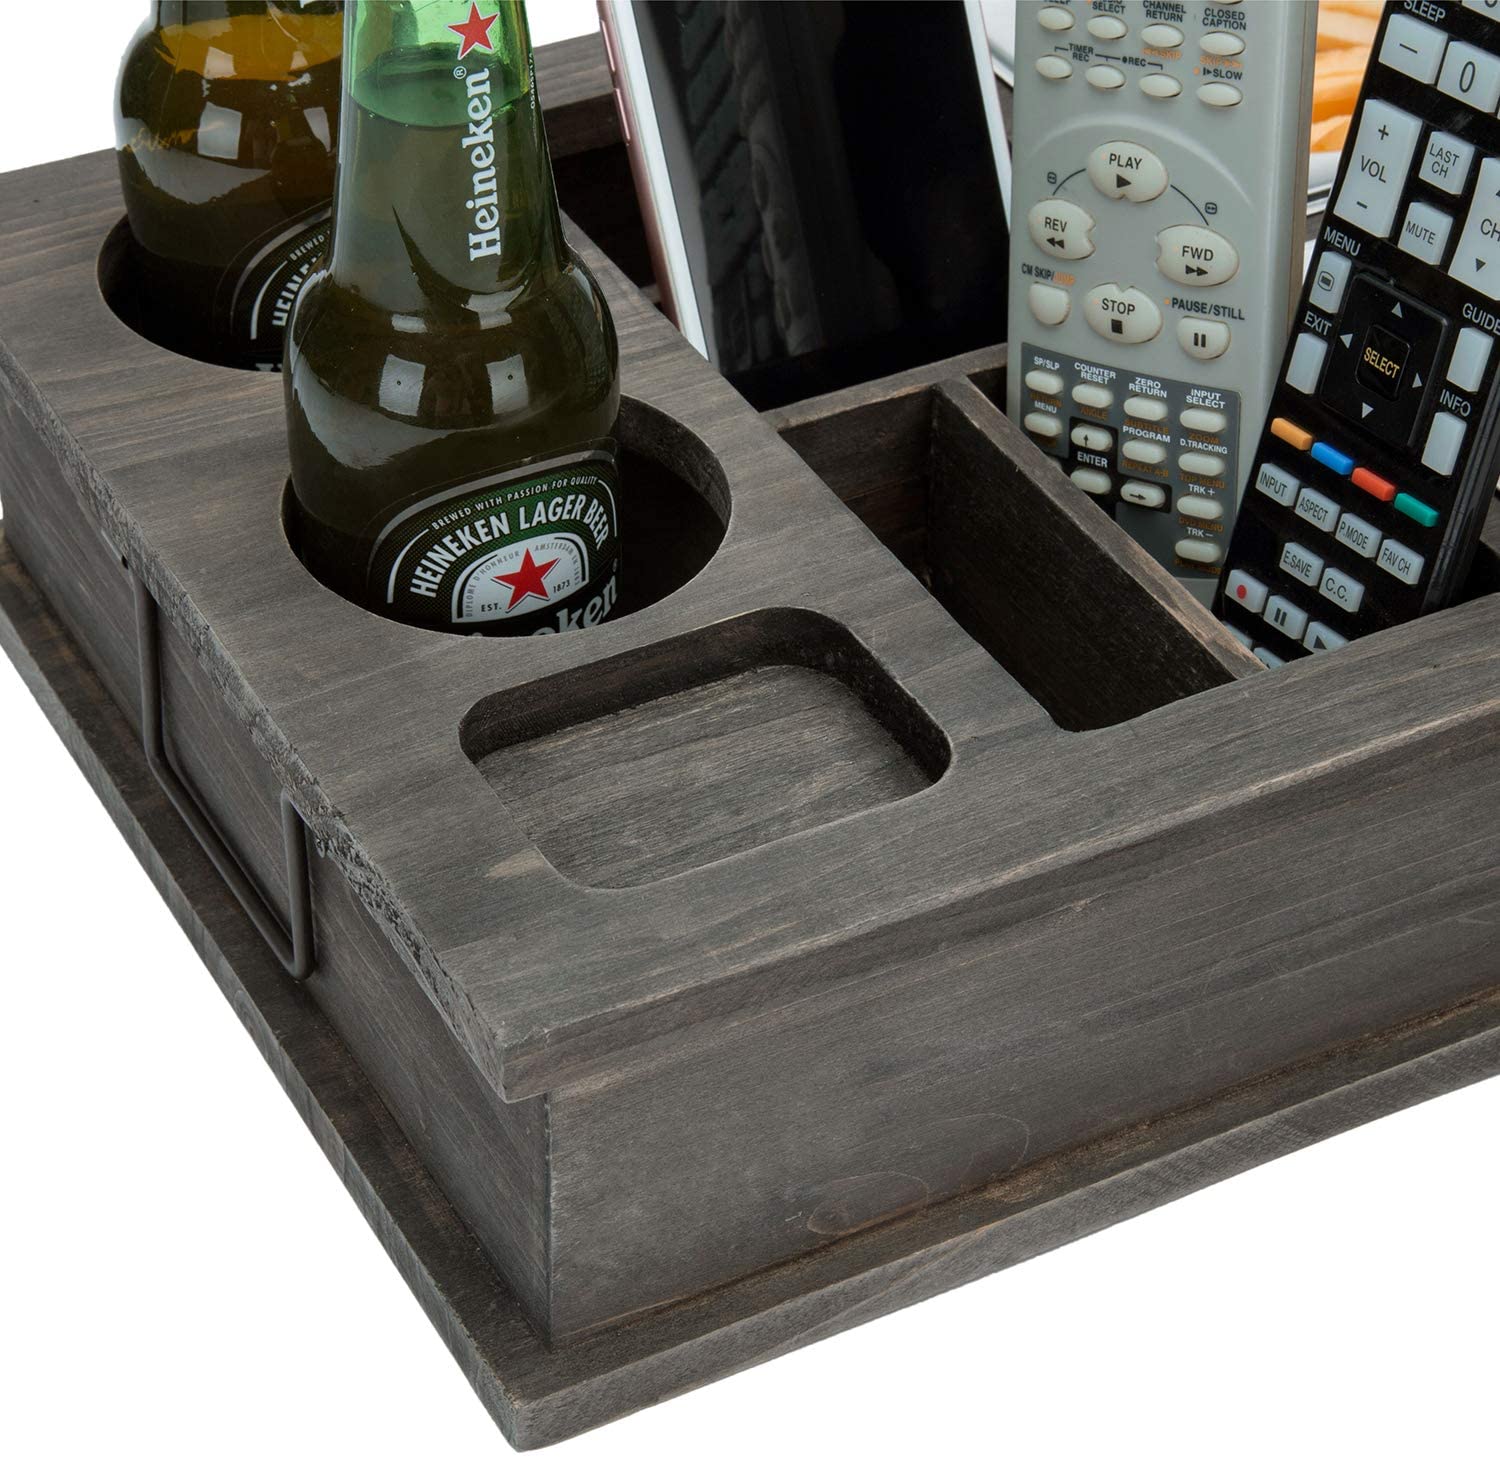 MyGift 16 inch Wood All-in-One Couch Snack Caddy & Remote Control/Bottle  holder 